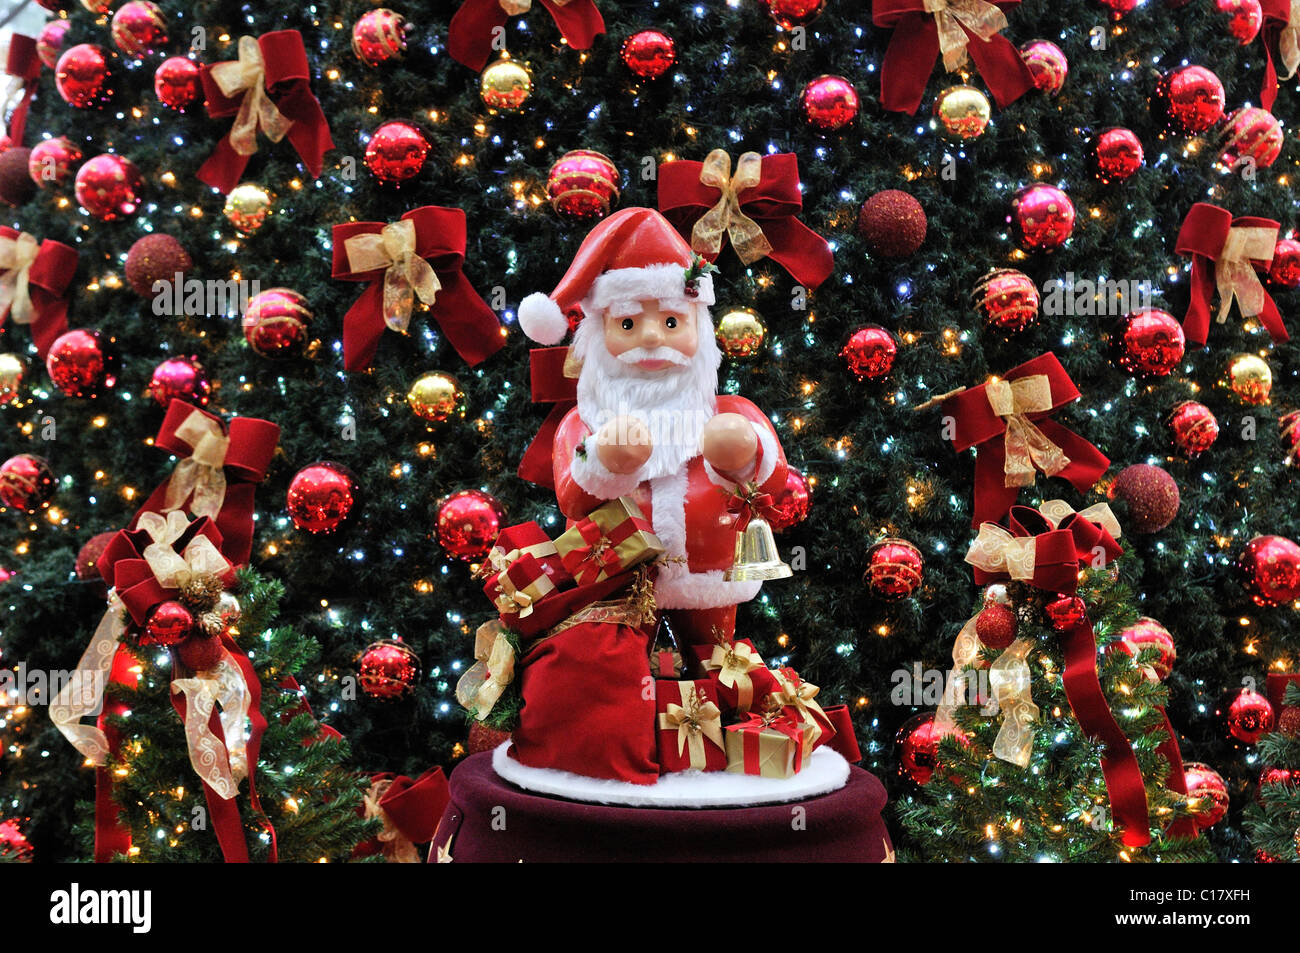 Santa Claus figure with a decorated Christmas tree at back, Sao Paulo, Brazil, South America Stock Photo